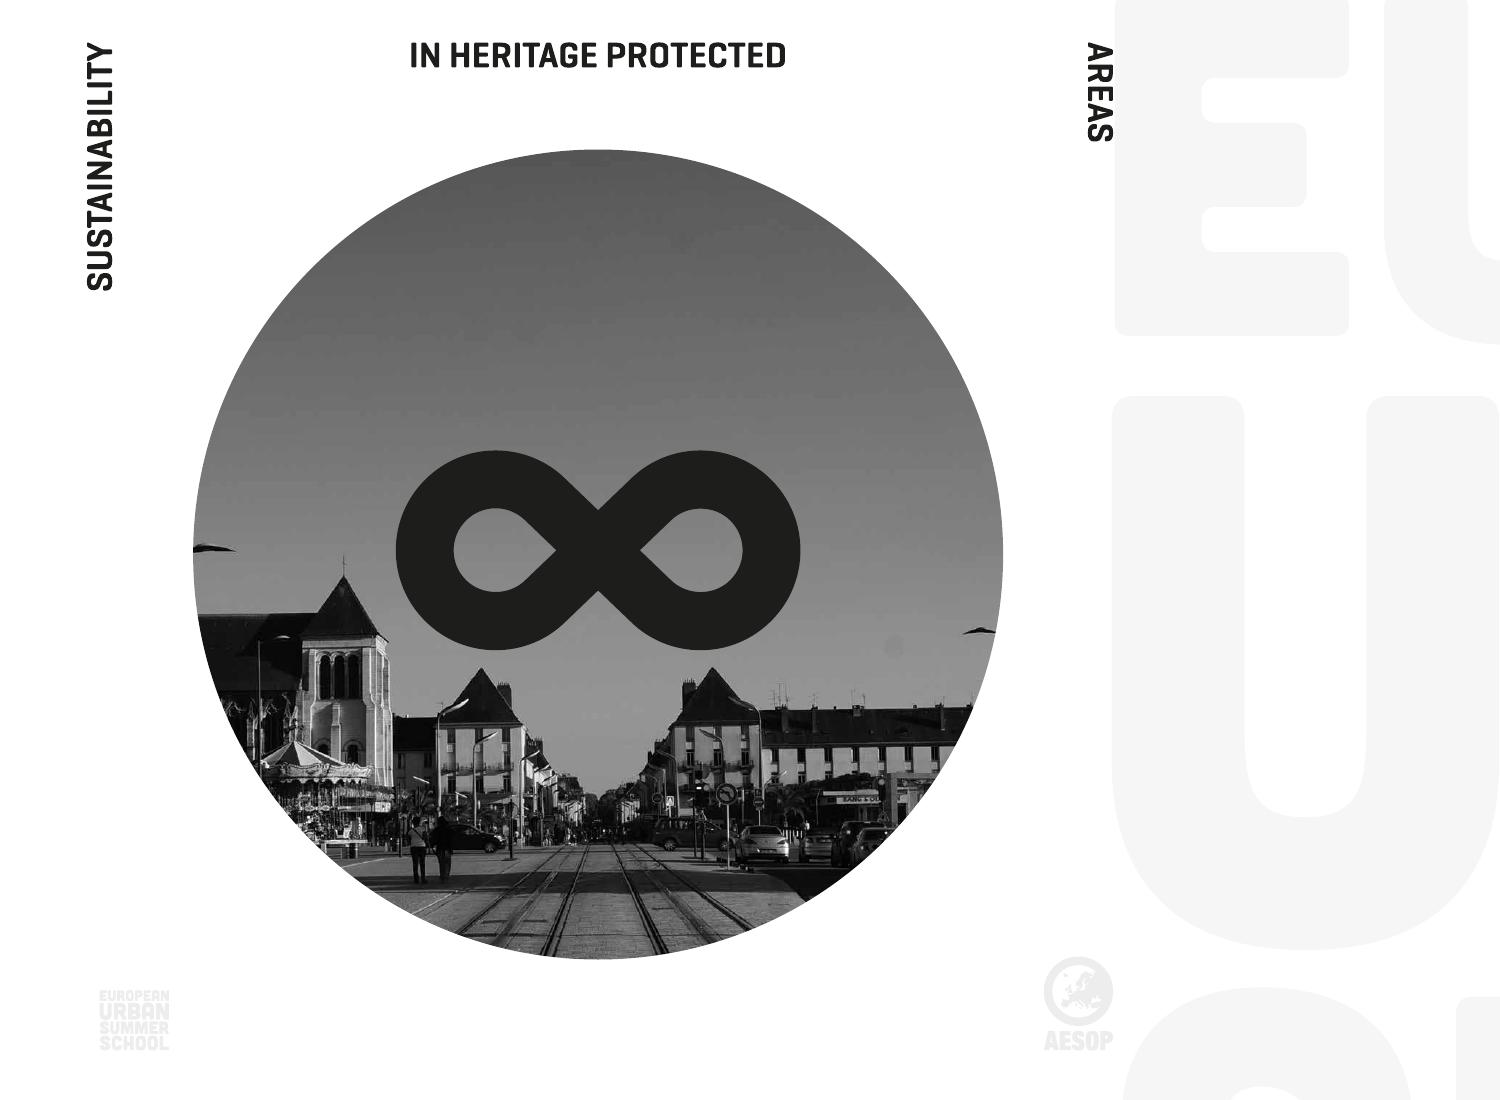 Salon De Jardin Carrefour Nouveau Sustainability In Heritage Protected areas by Haveasign issuu